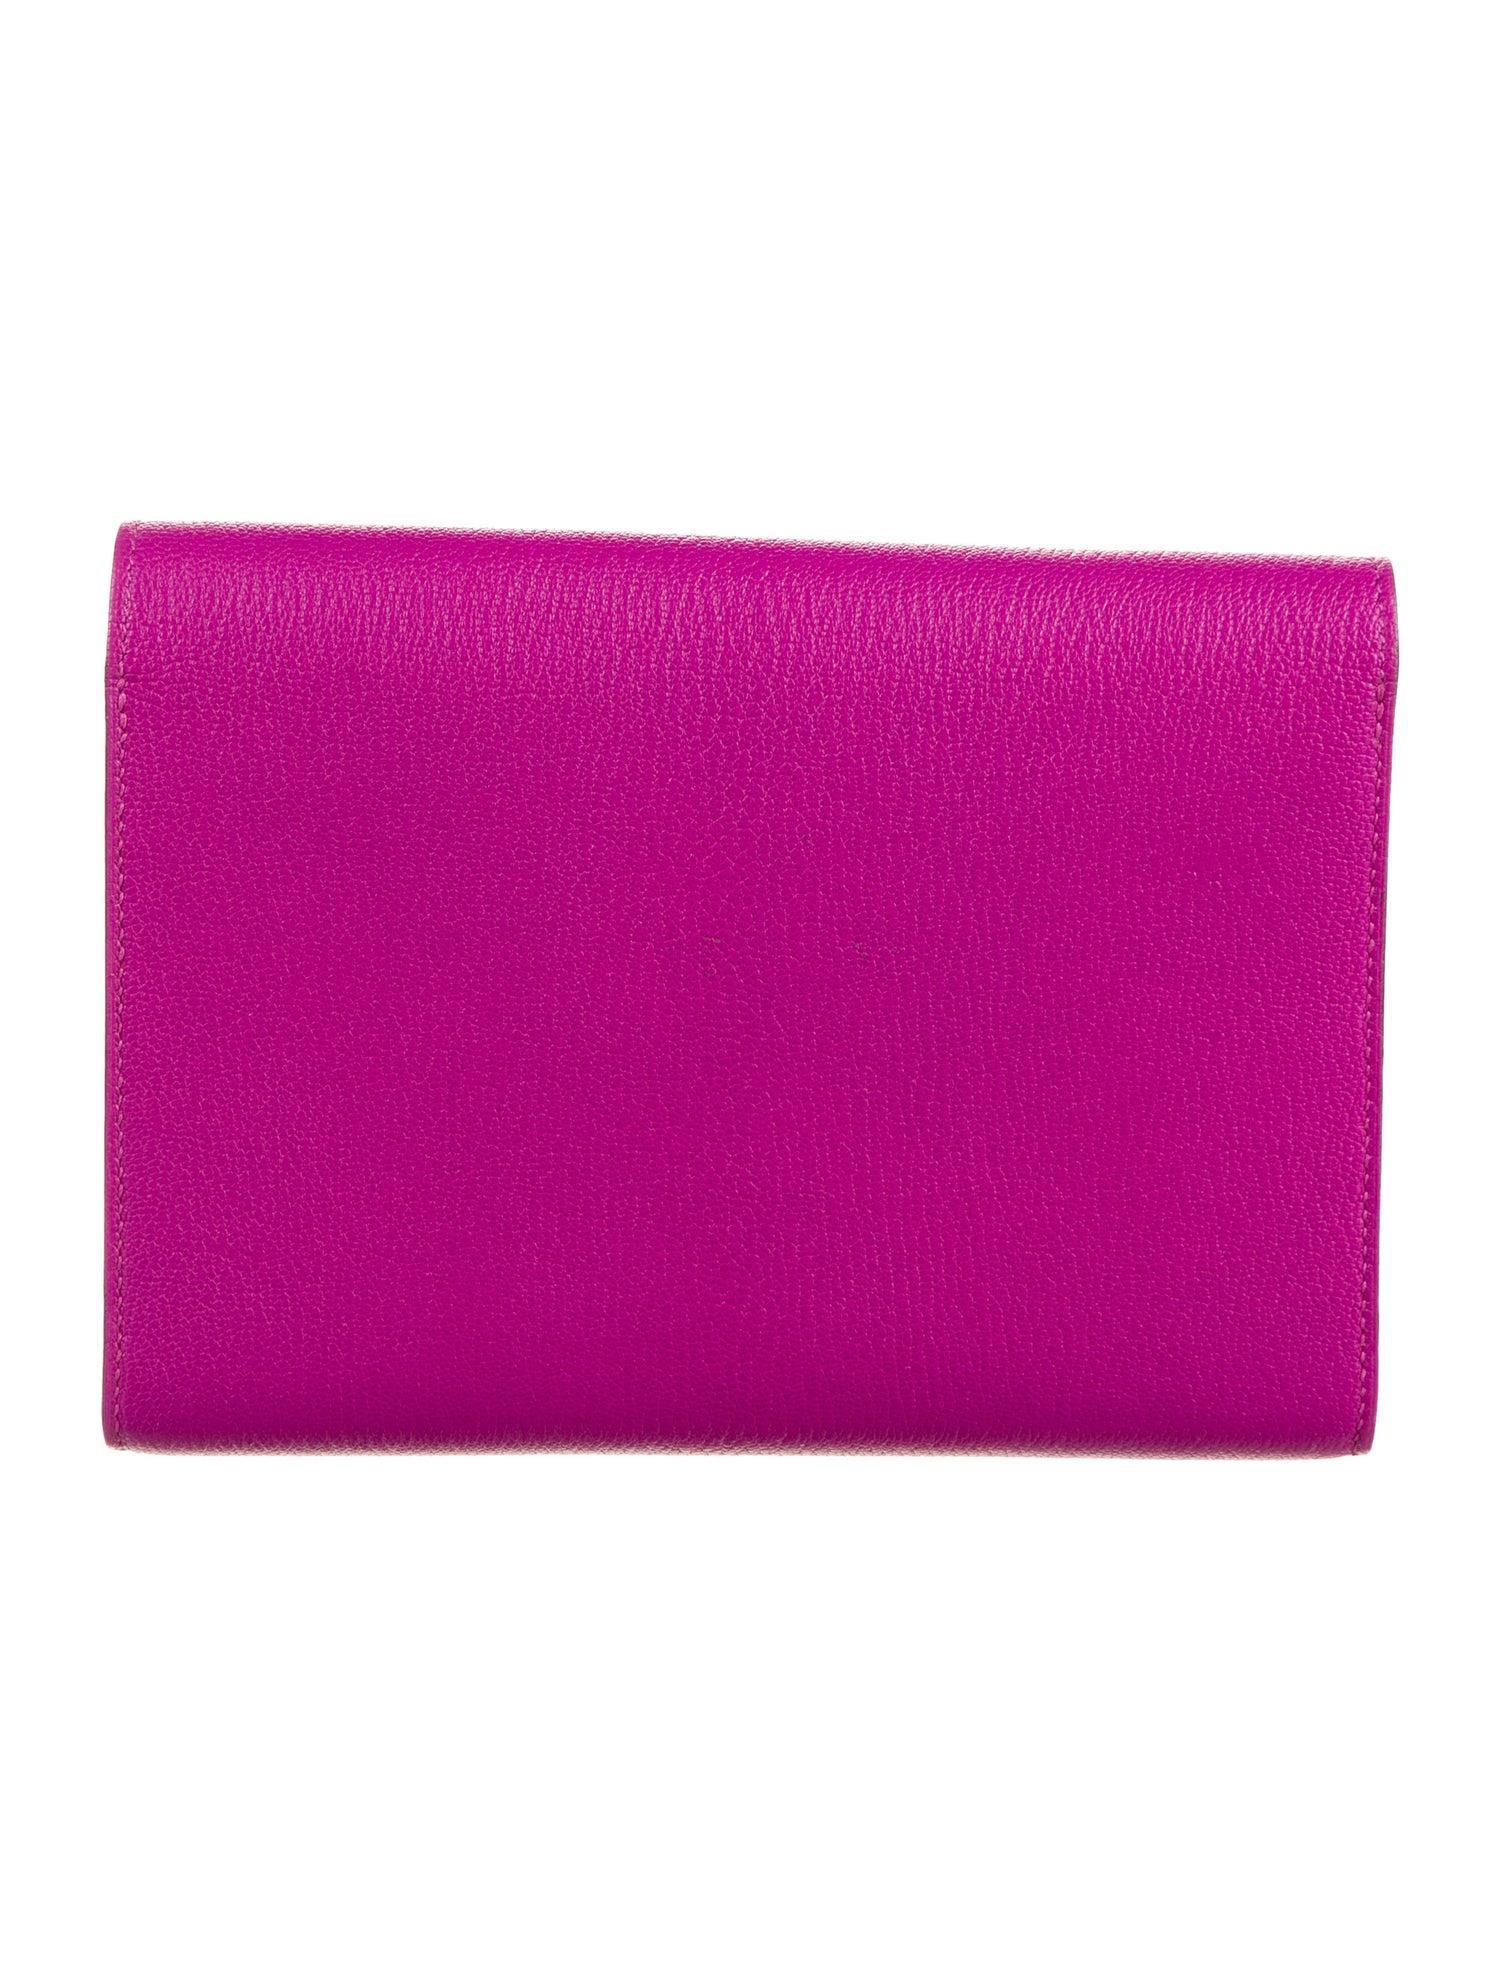 Purple Hermes NEW Fuchsia Magnolia Leather Small Clutch Wallet Evening Flap Bag in Box